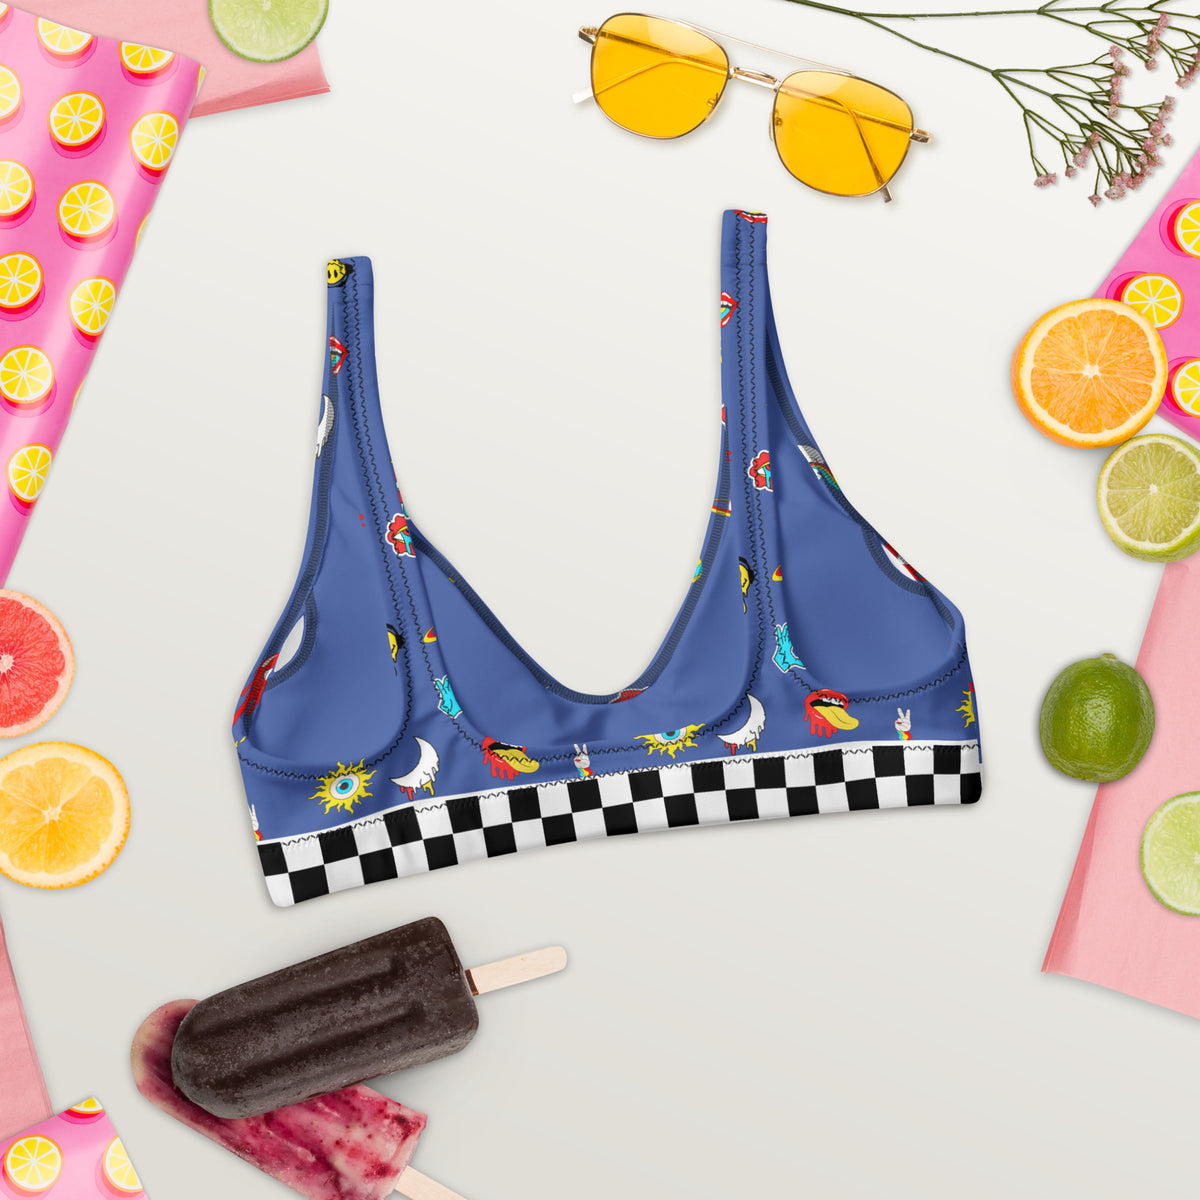  Blue, Bikini Top, All Over Print, Psychedelic, Skulls, Rainbow Eyes, Mouth, Tongue Out, Rainbow Circles, Moons, Rainbow Drops, Smiley Faces, Headphones